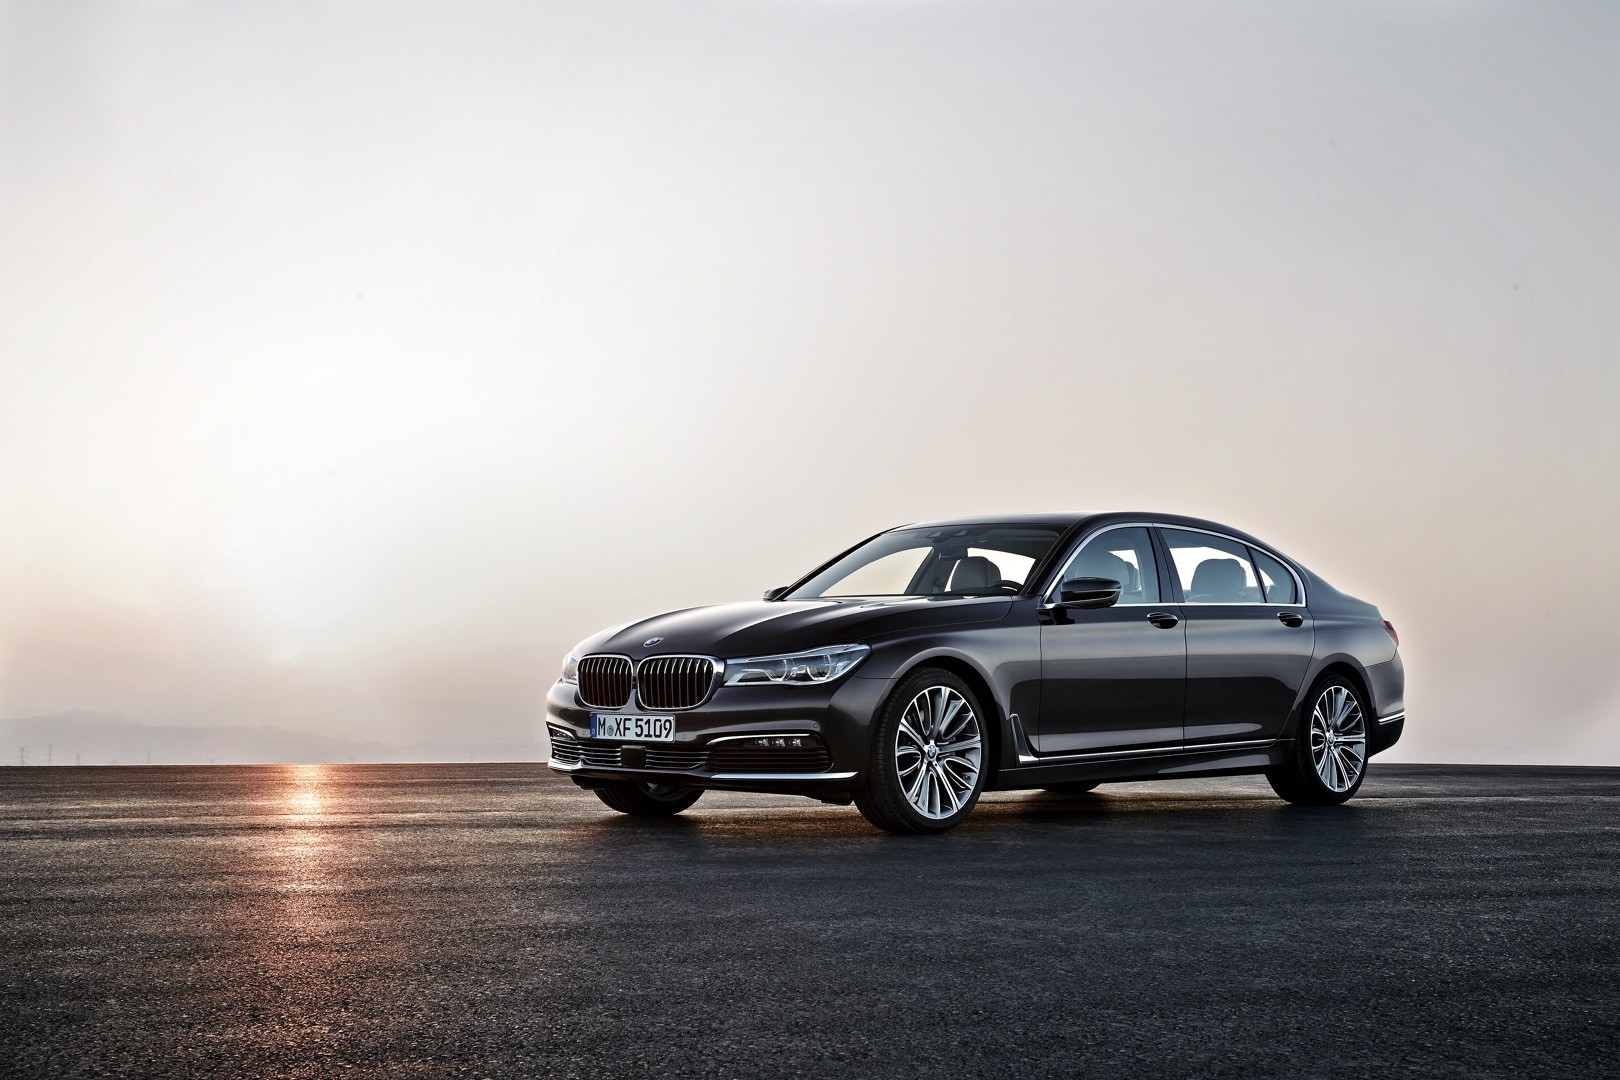 The All-New 2016 BMW 7-Series Debuts - CAMARO6